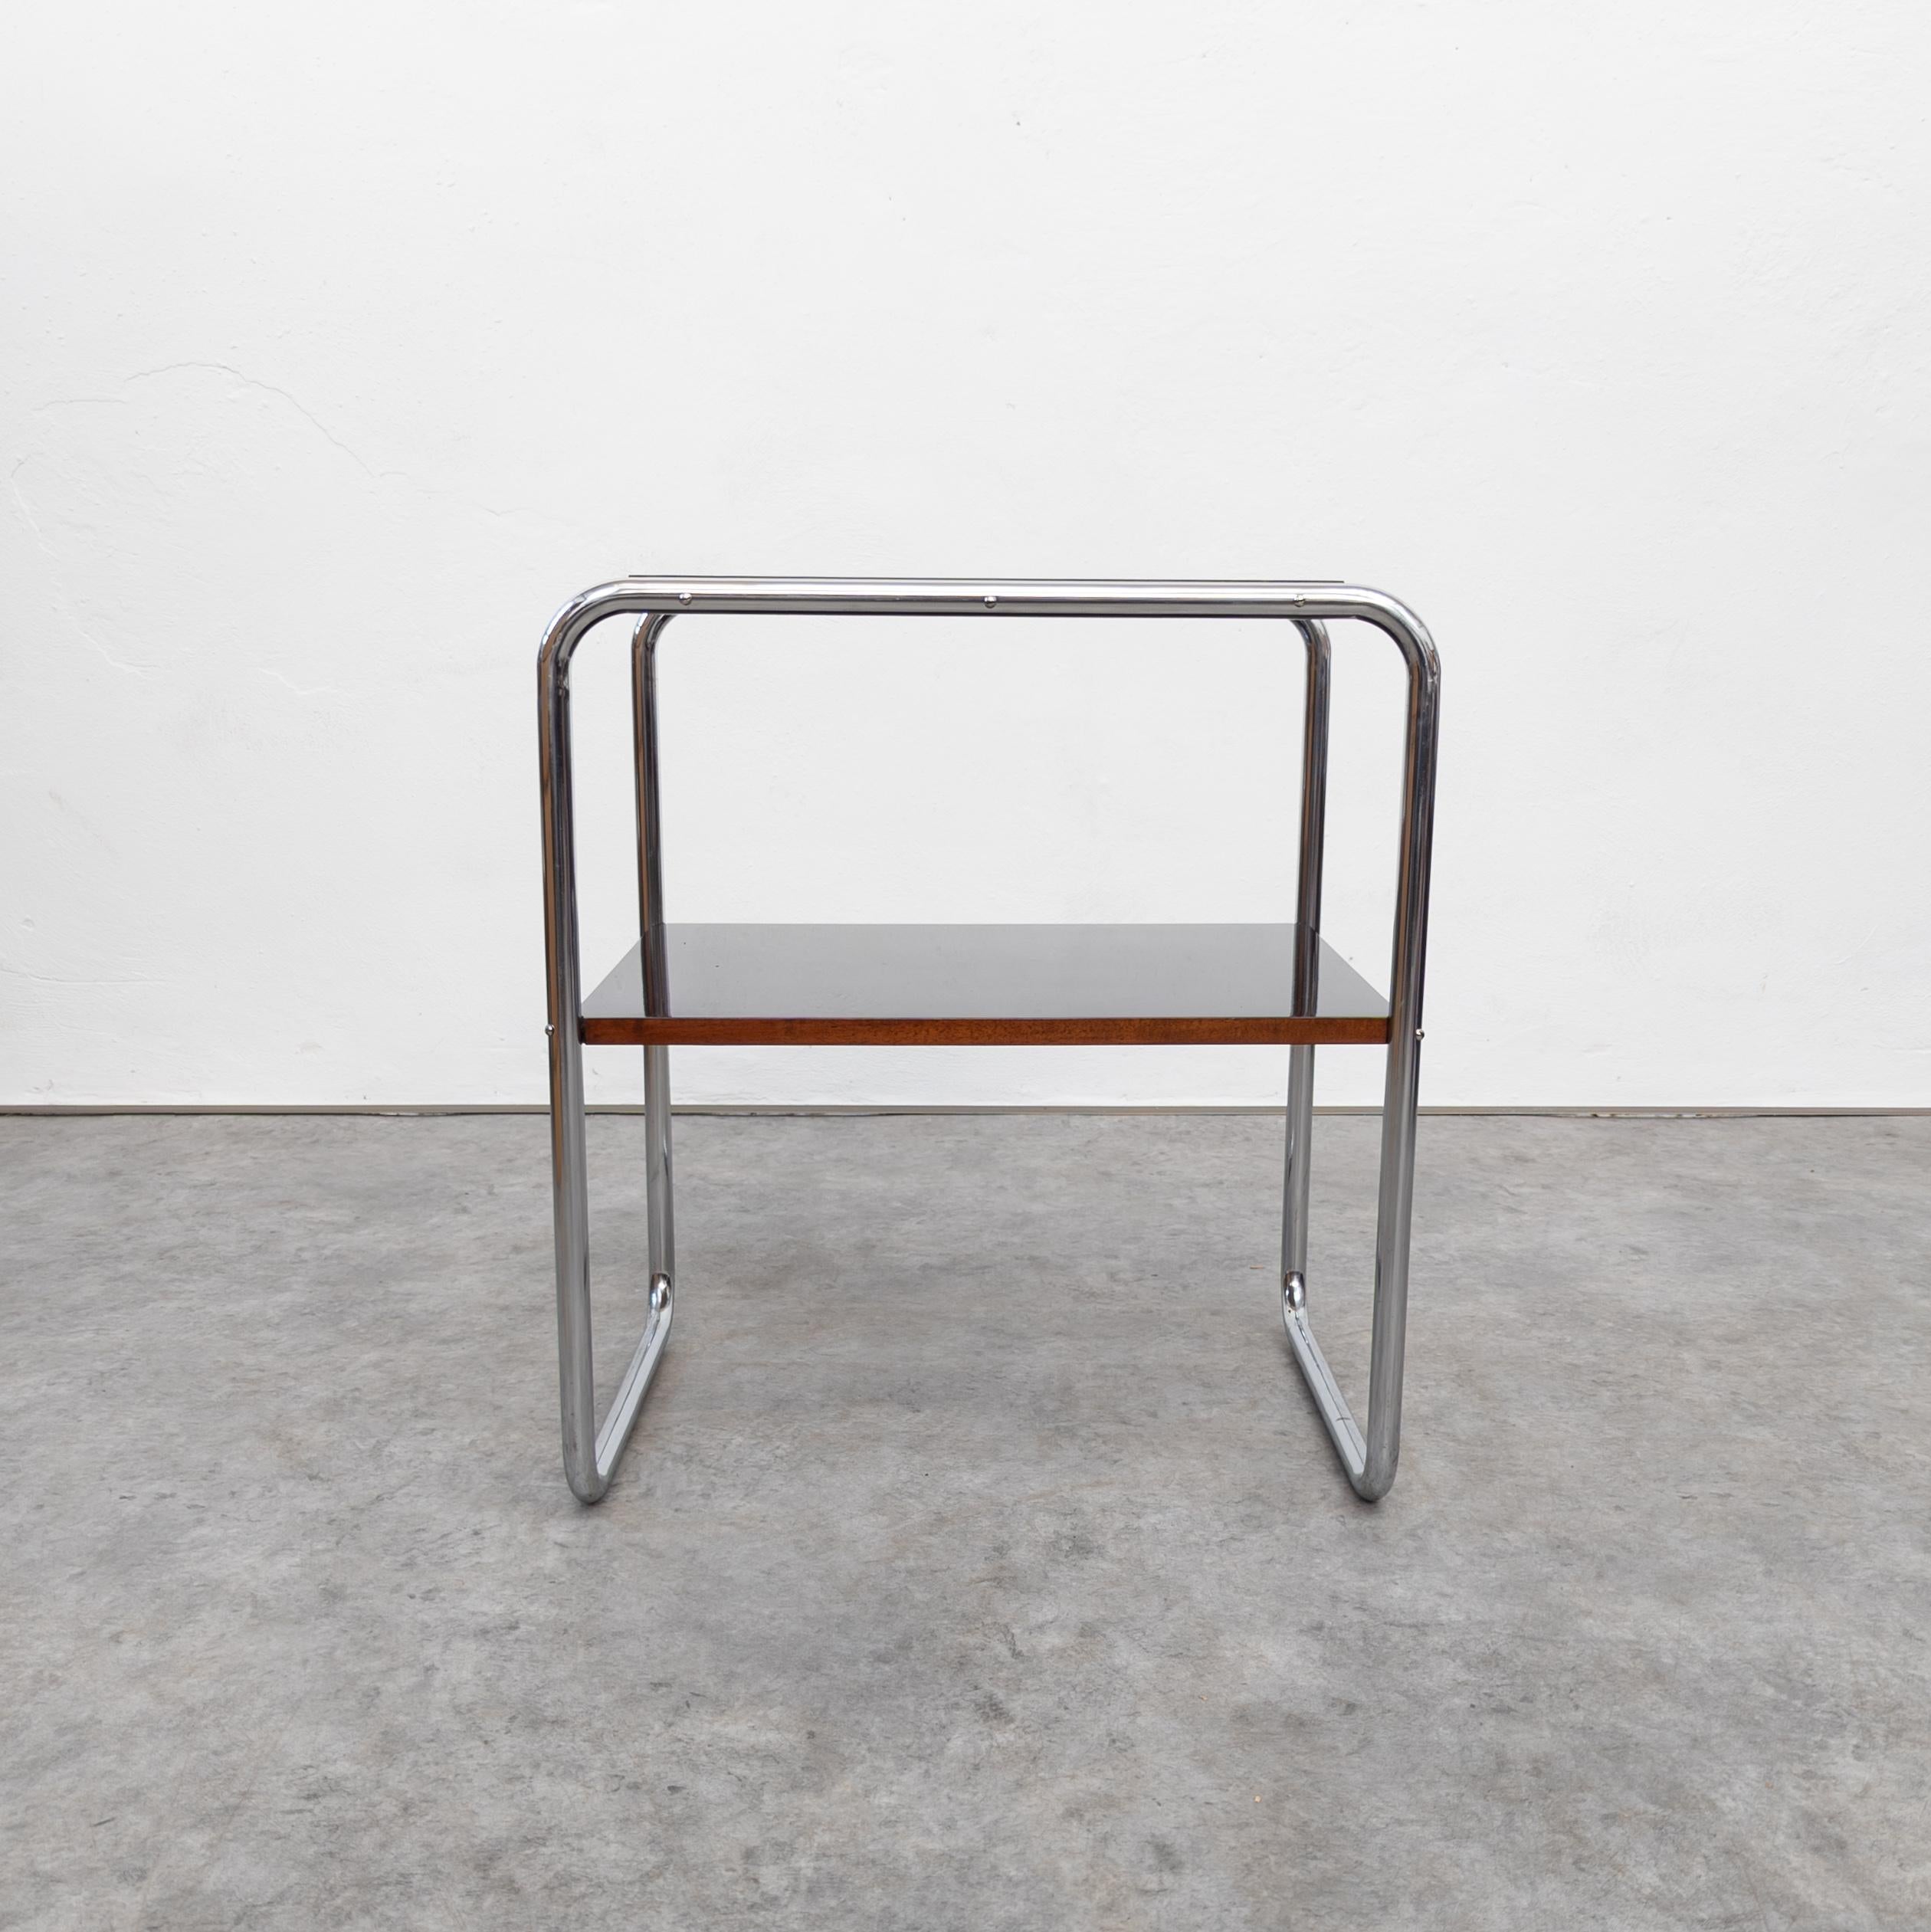 Mid-20th Century Rare restored Bauhaus tubular steel side table by Marcel Breuer  For Sale